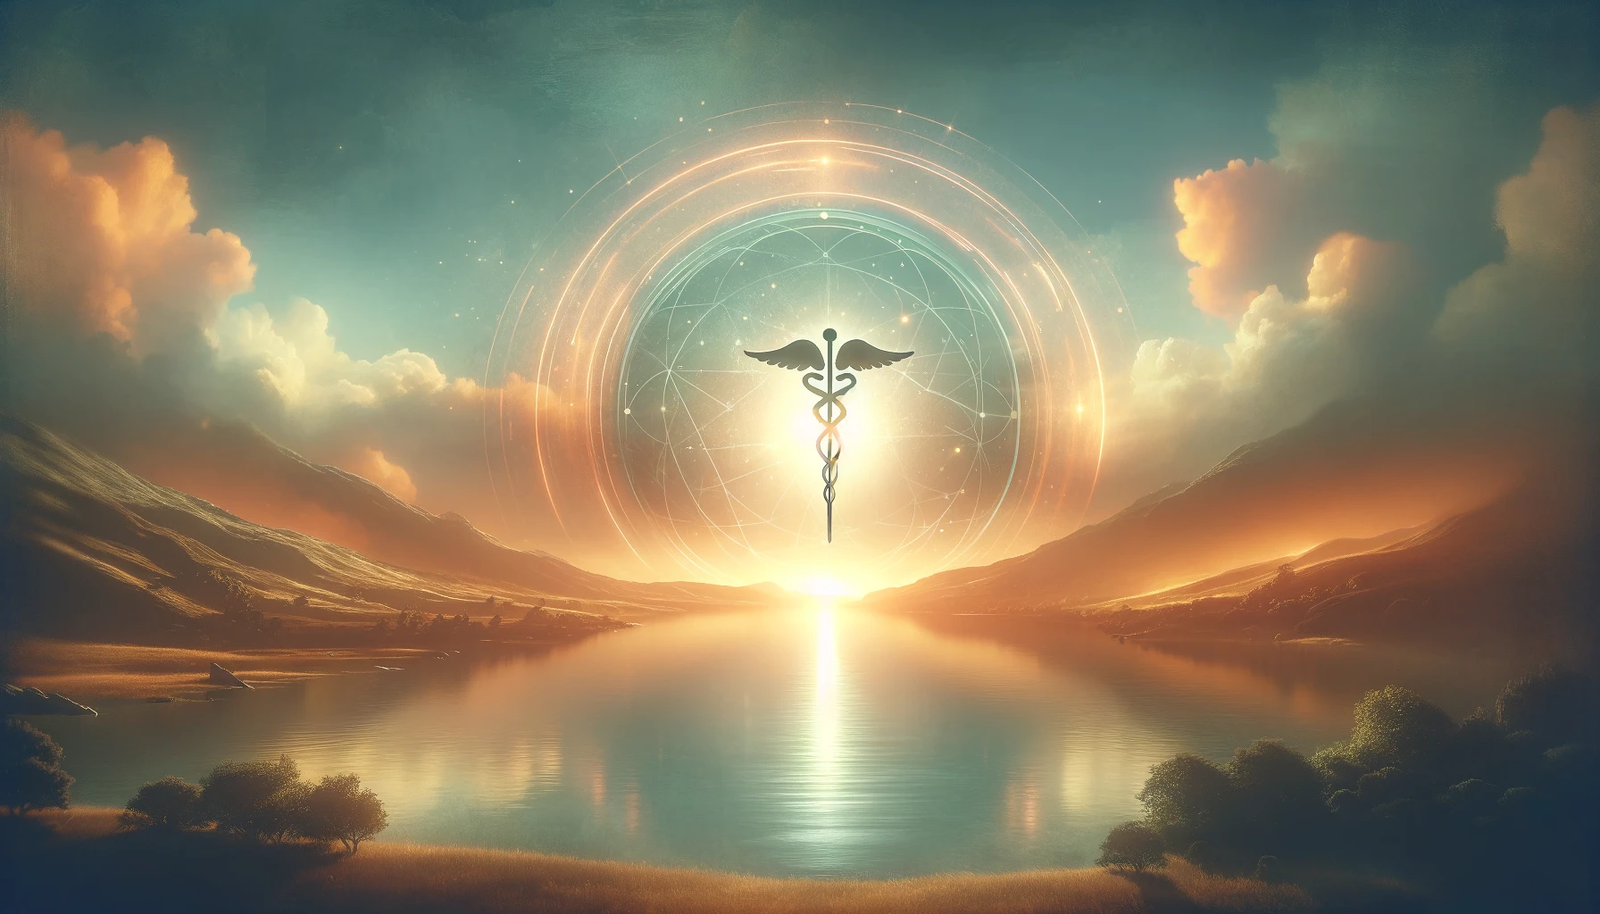 Sunrise over serene landscape with Rod of Asclepius symbol, depicting new beginnings and hope in mental health treatment with Long-Acting Injectable Antipsychotics (LAIs).